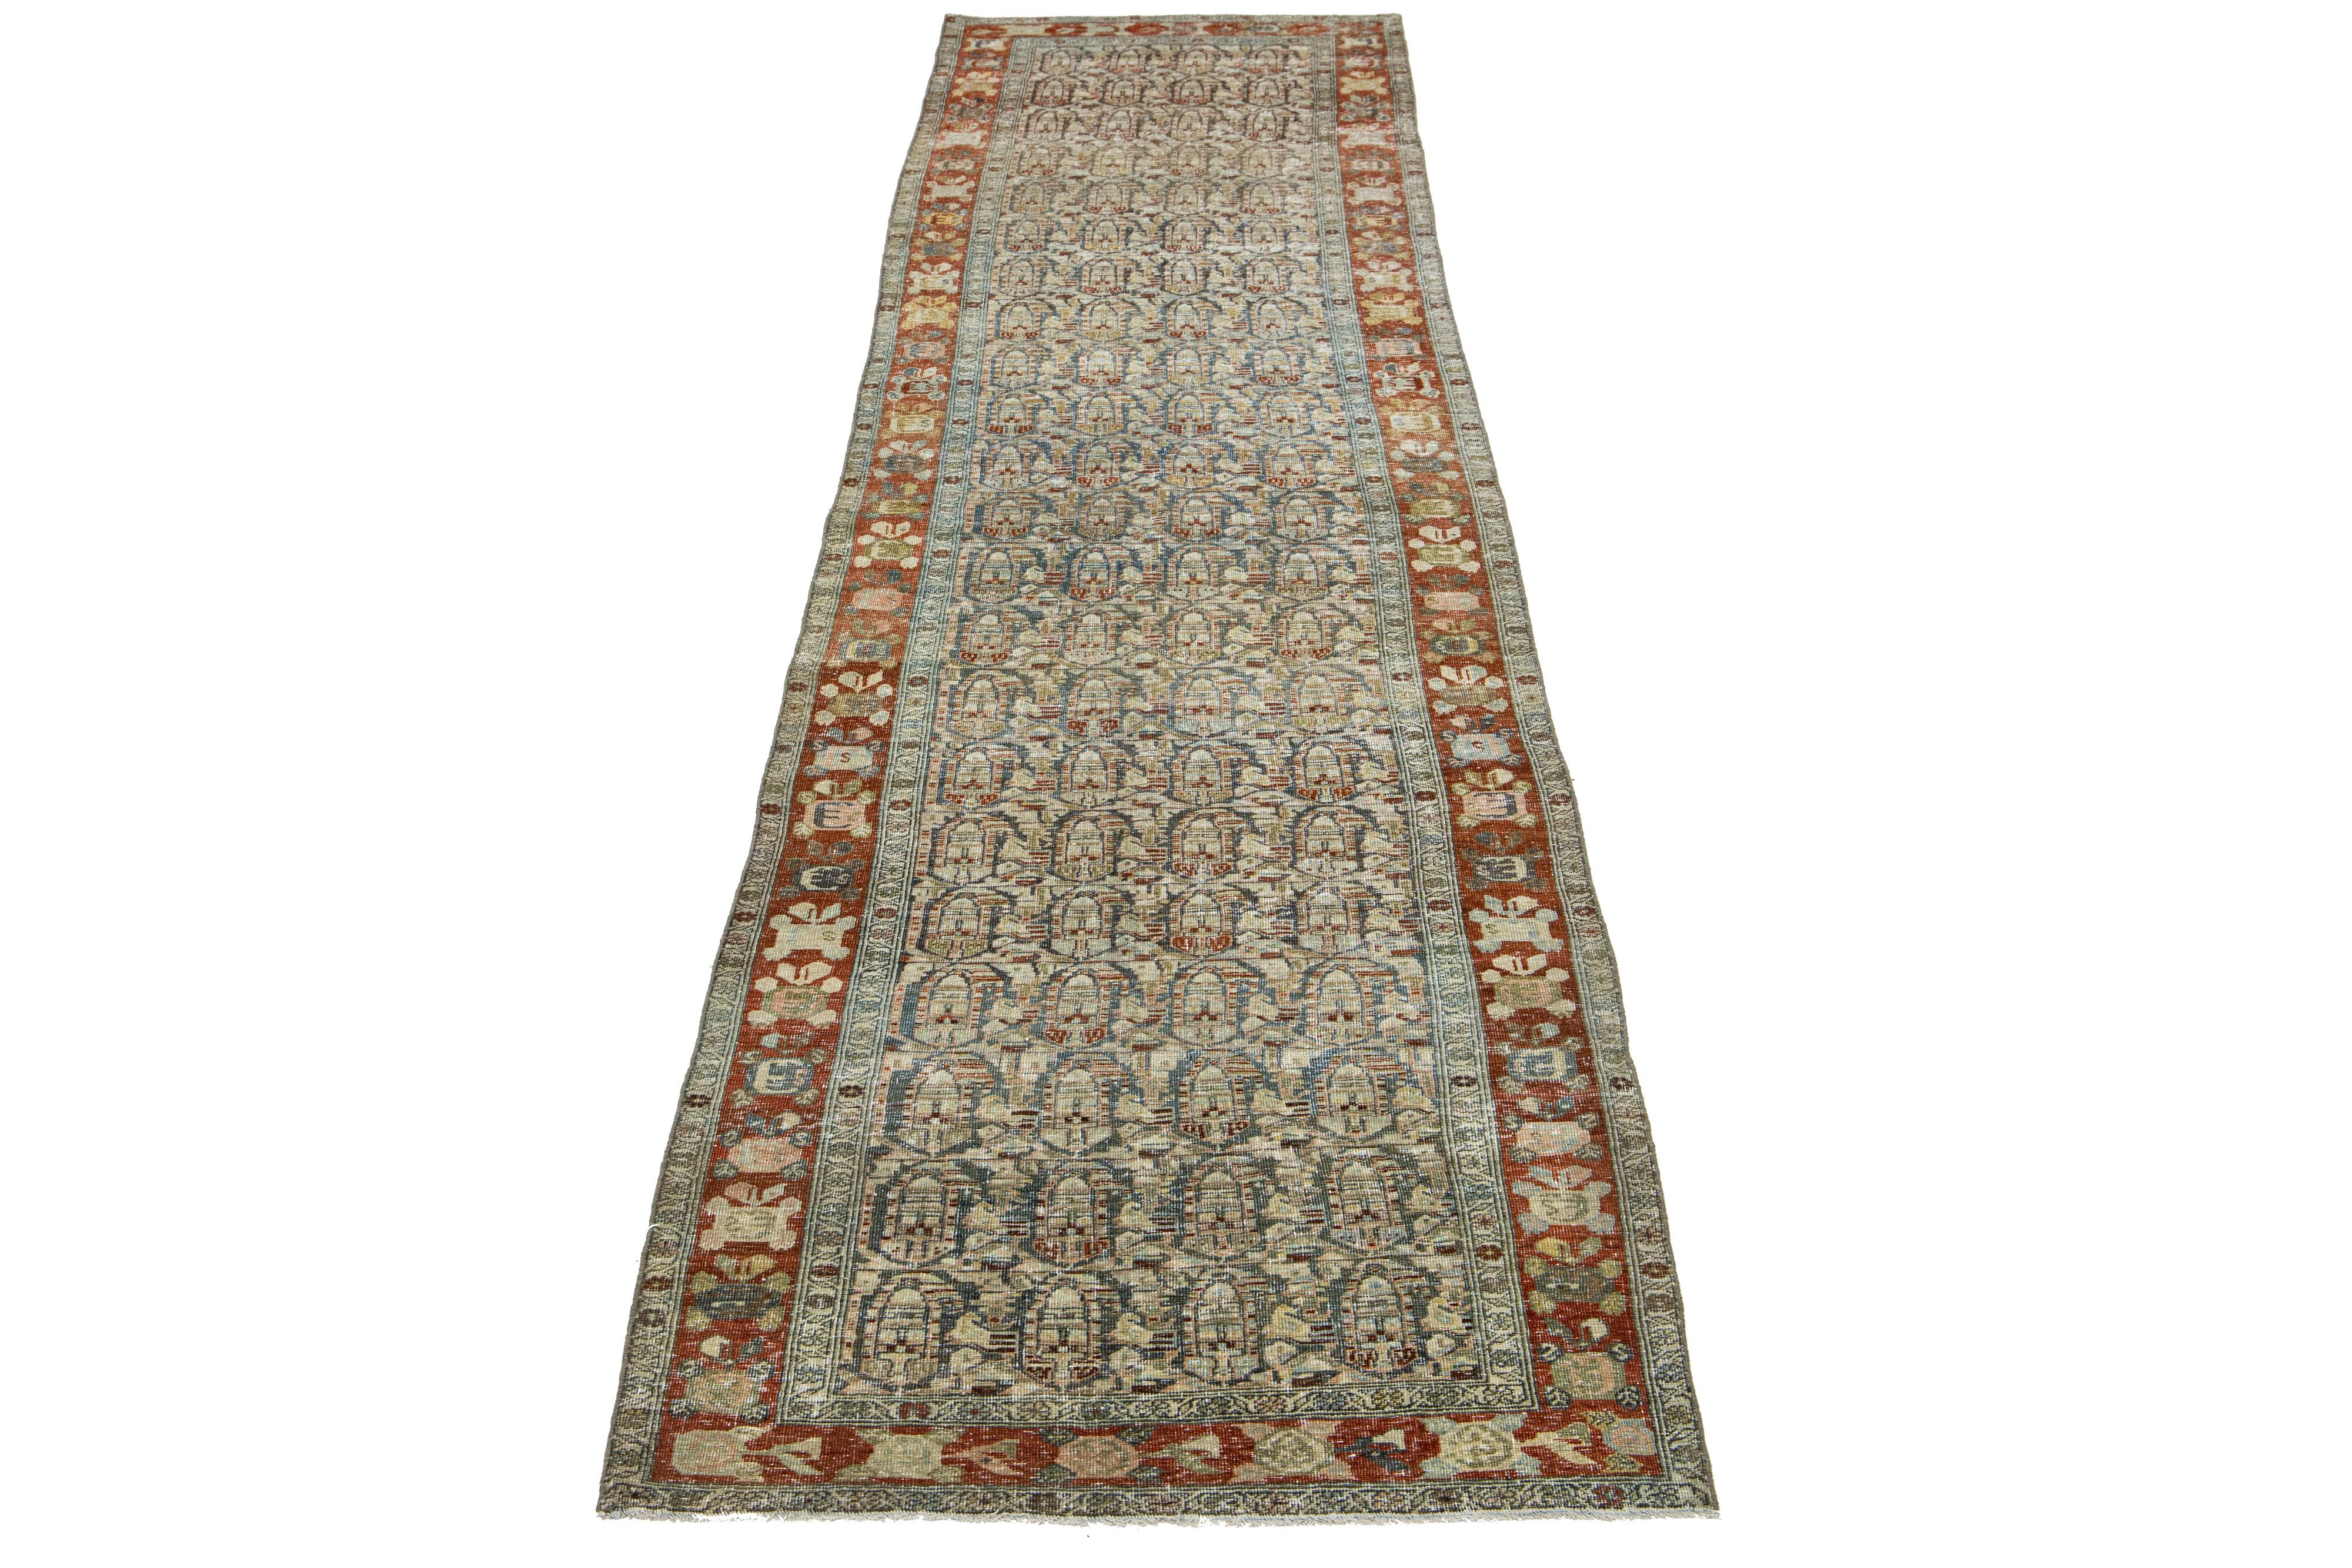 This Persian Malayer wool rug has an antique charm. It features hand-knotted wool in a blue field and an allover pattern adorned with rust, peach, beige, and brown accents.

This rug measures 3'4